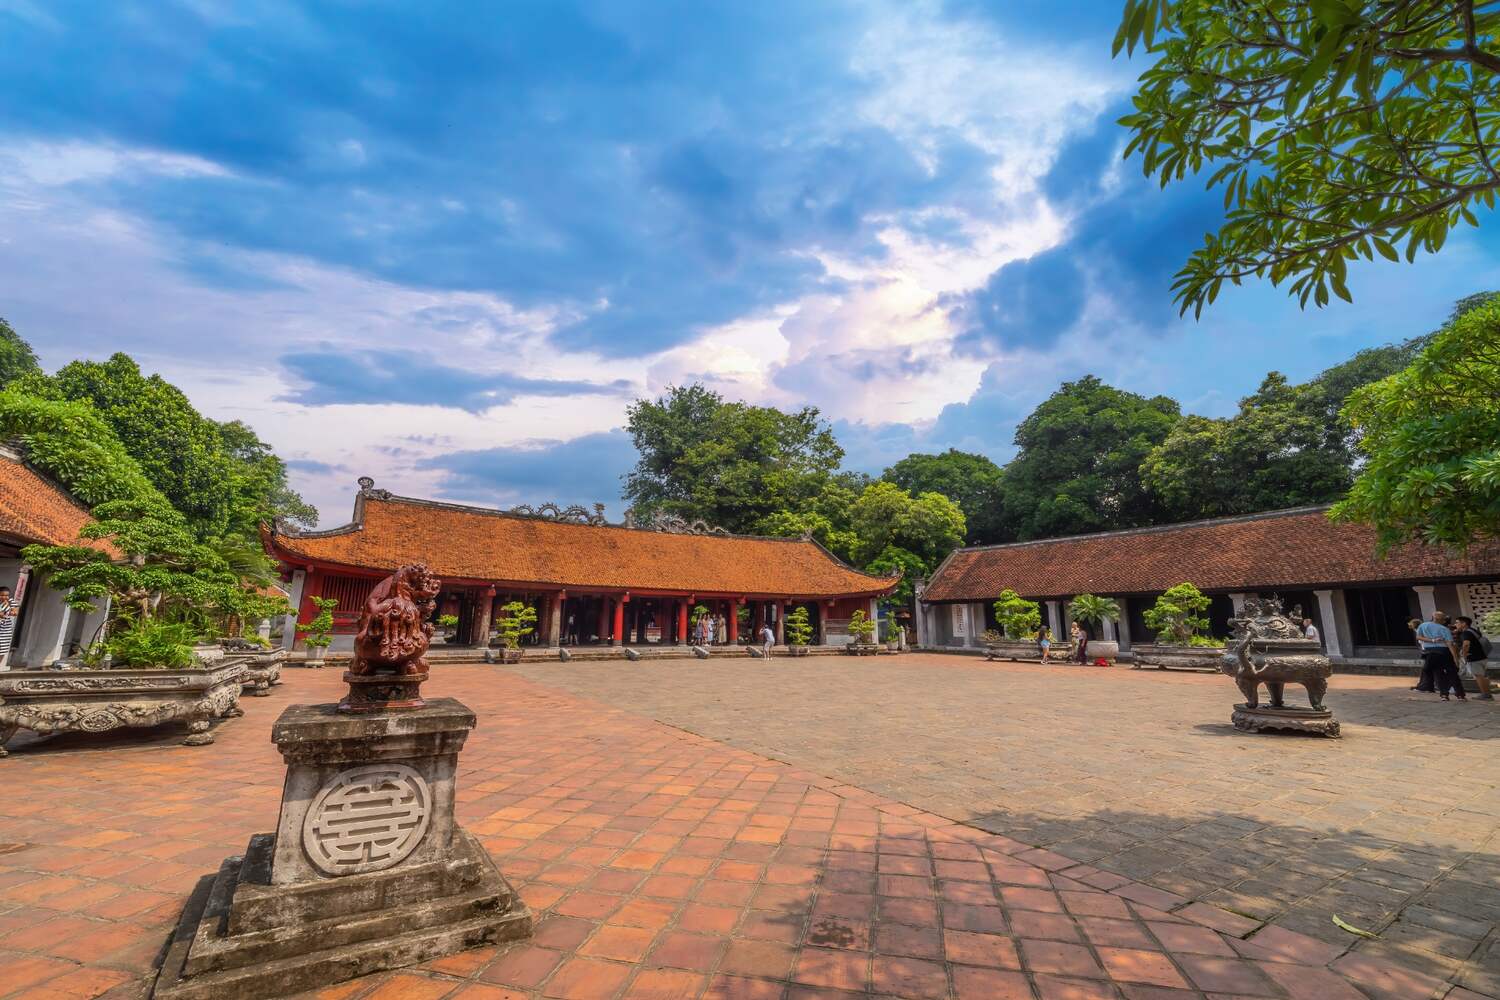 Expansive courtyard of the Temple of Literature, flanked by traditional Vietnamese architecture under a cloudy sky.